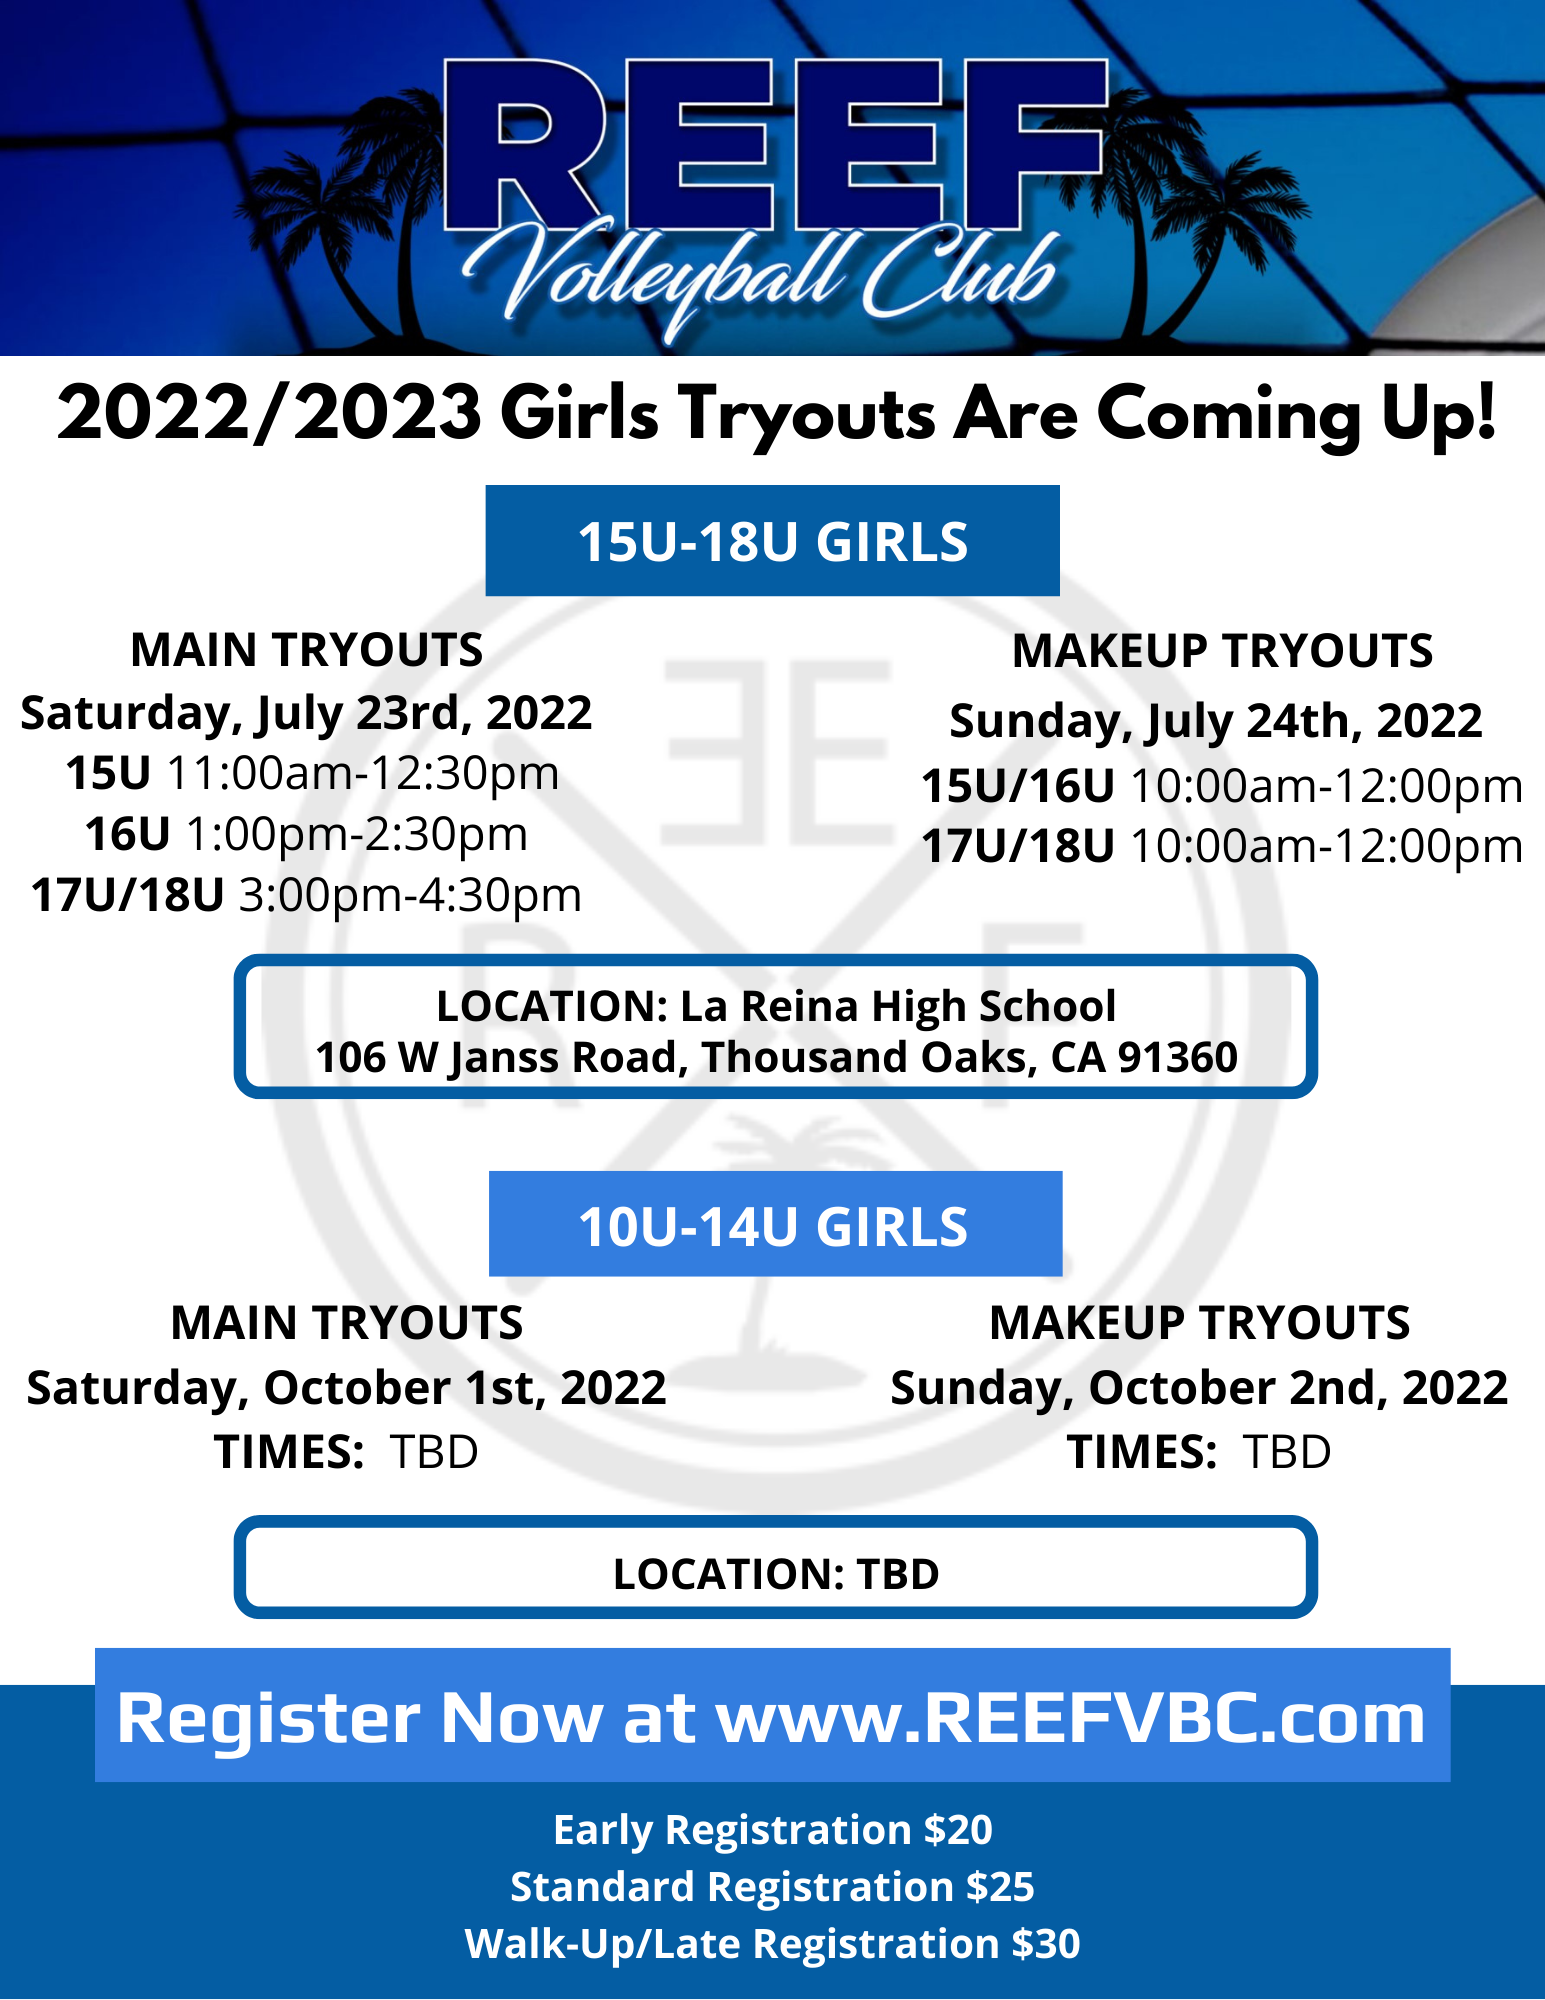 Reserve your spot for girls 2022/23 tryouts: https://www.reefvbc.com/home